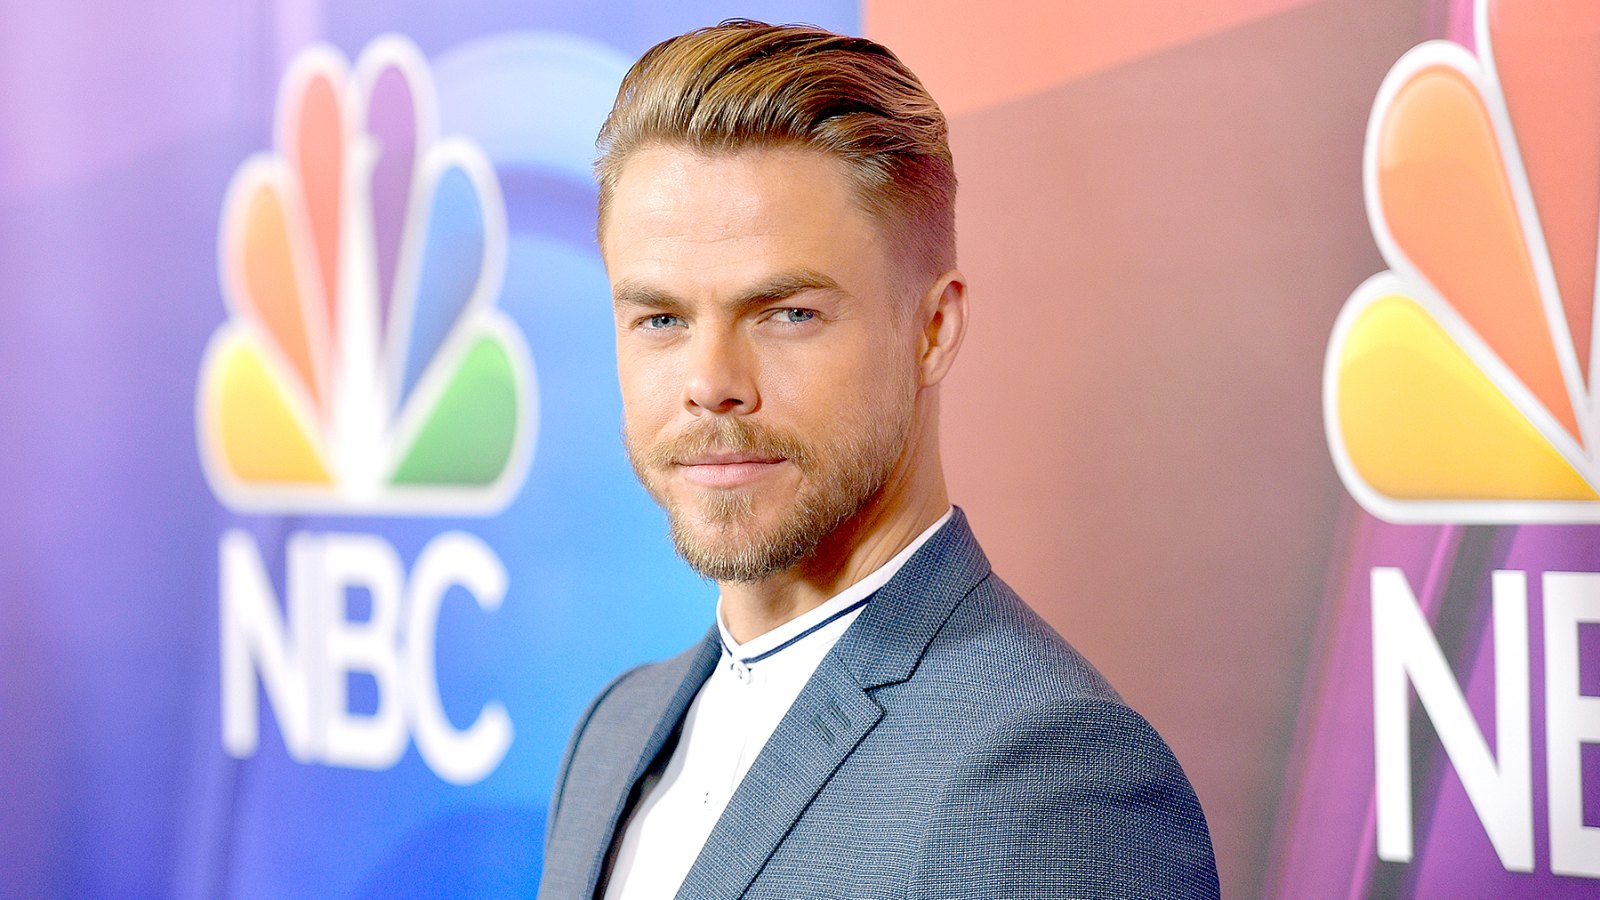 Derek Hough at the NBCUniversal Summer TCA Press Tour at The Beverly Hilton Hotel on August 3, 2017 in Beverly Hills, California.